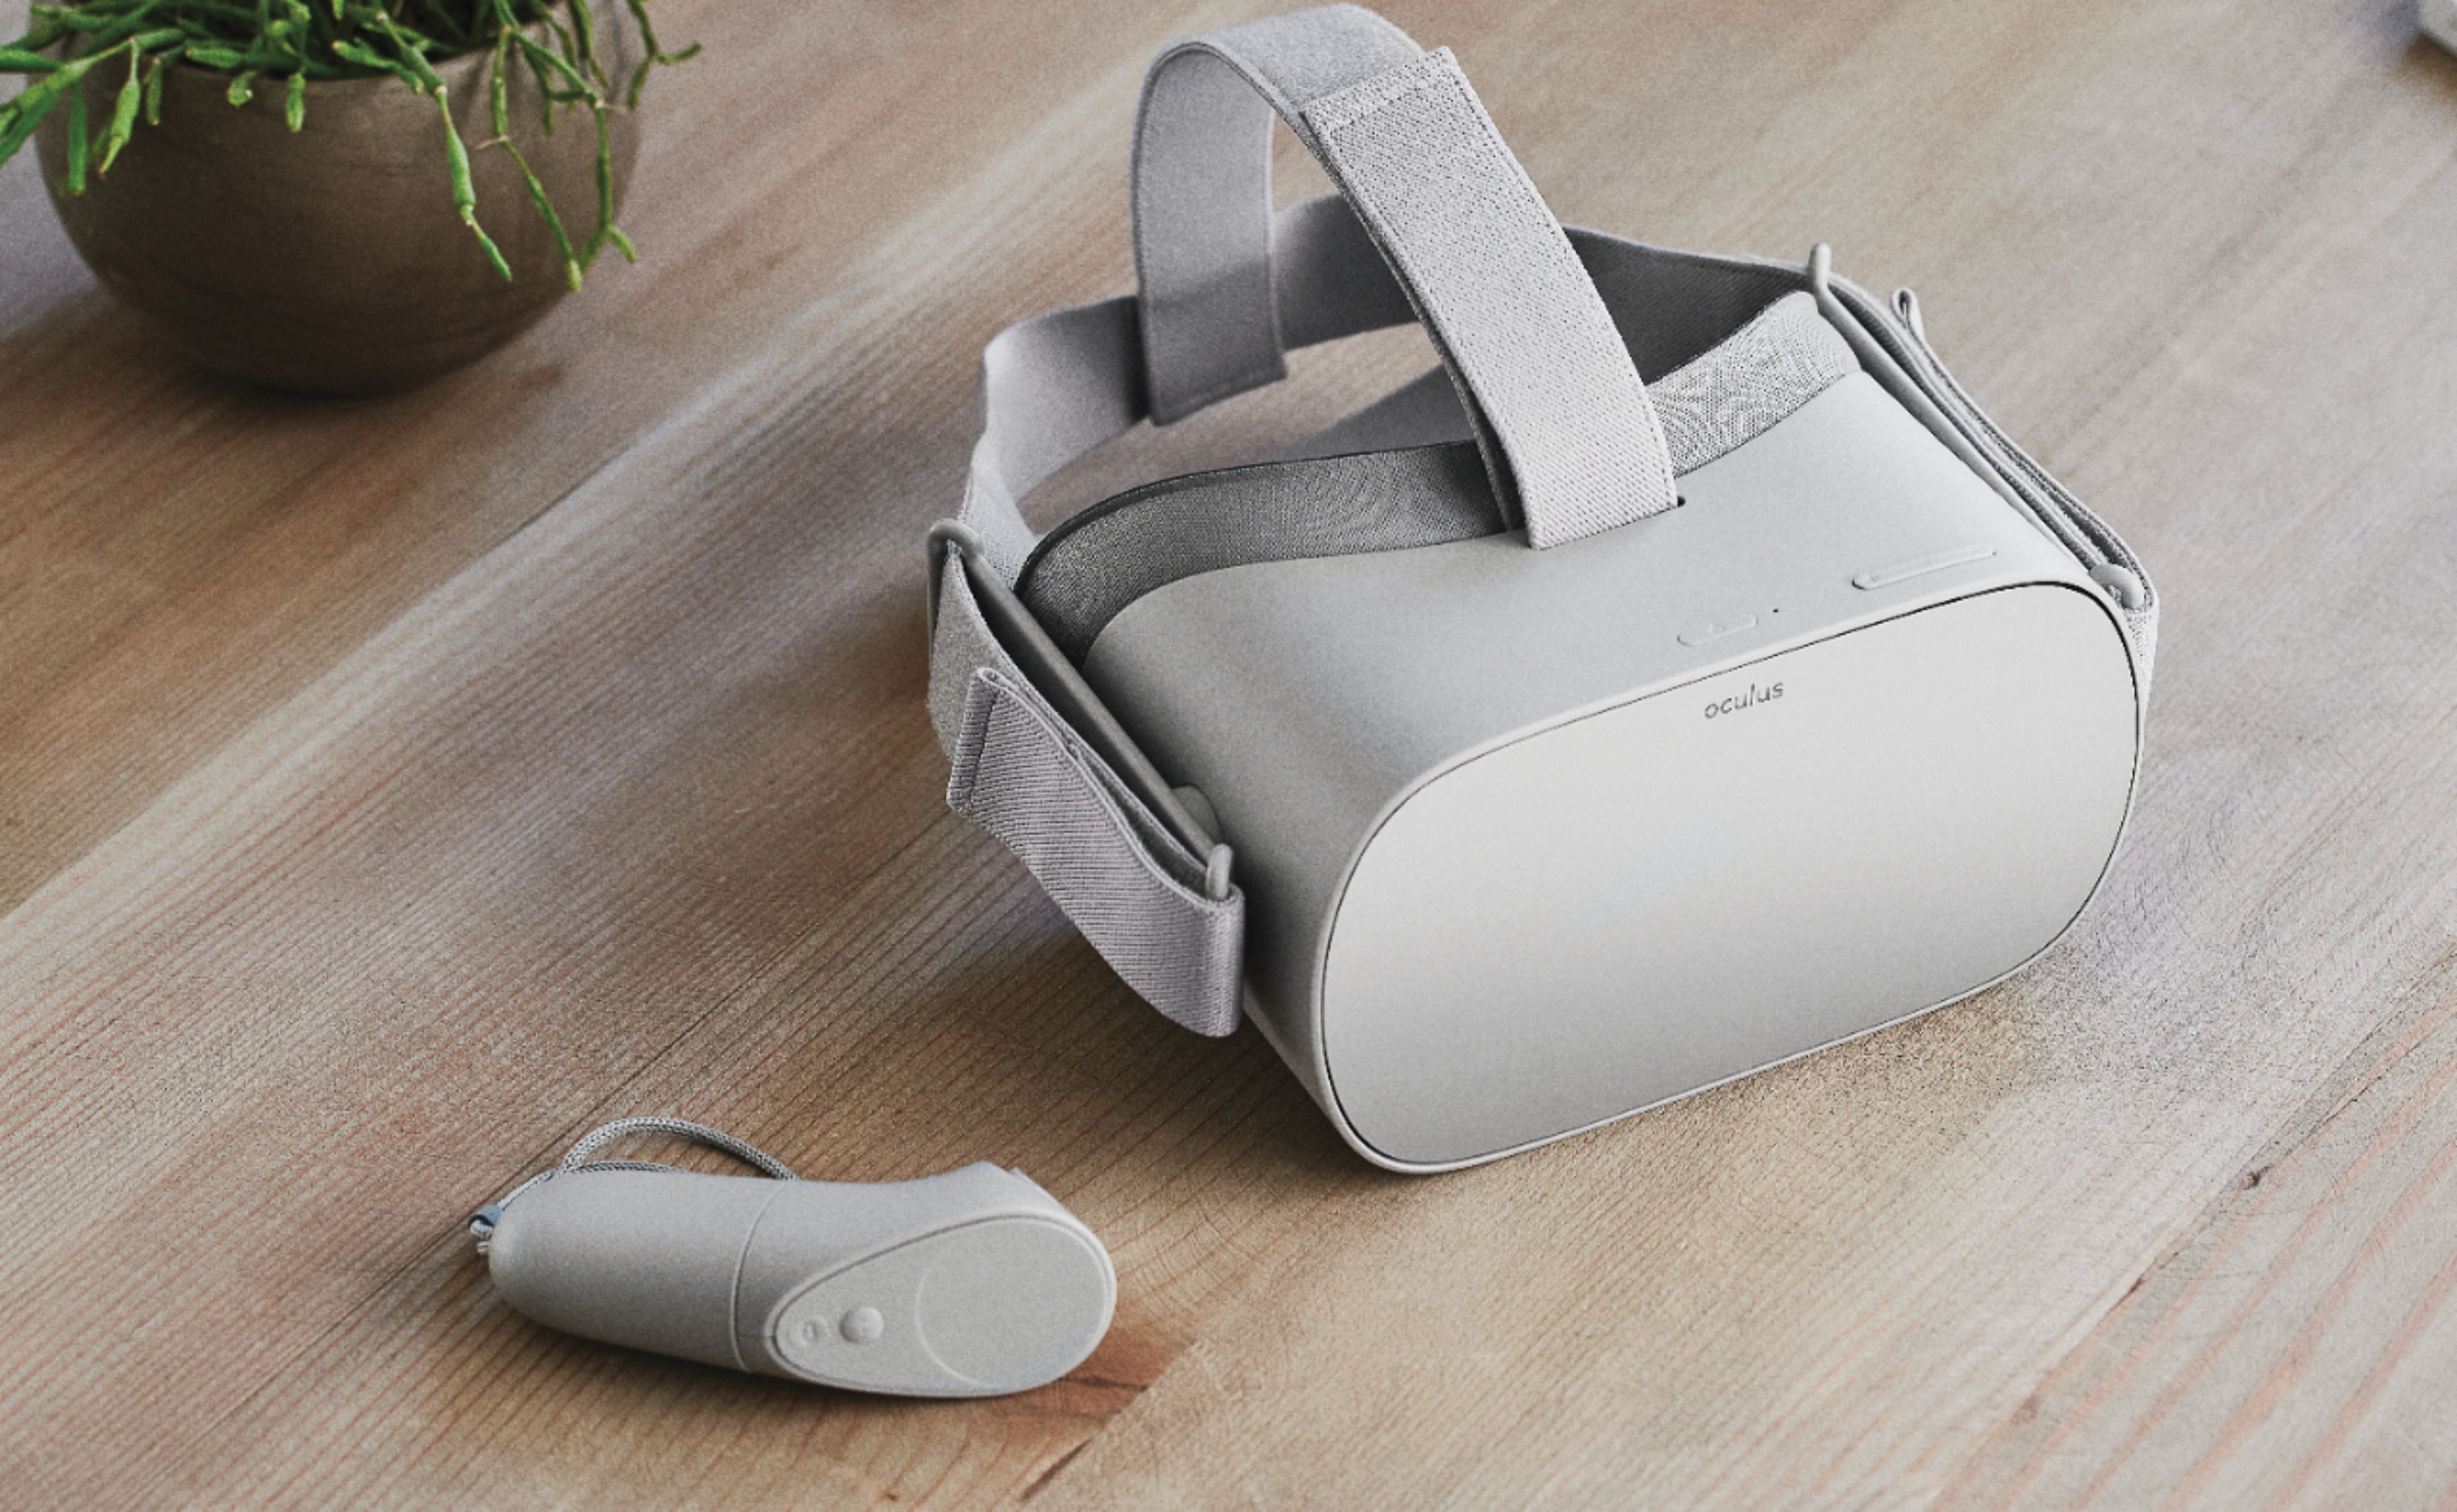 PC/タブレット PC周辺機器 Best Buy: Oculus Go 32GB Stand-Alone Virtual Reality Headset 301 